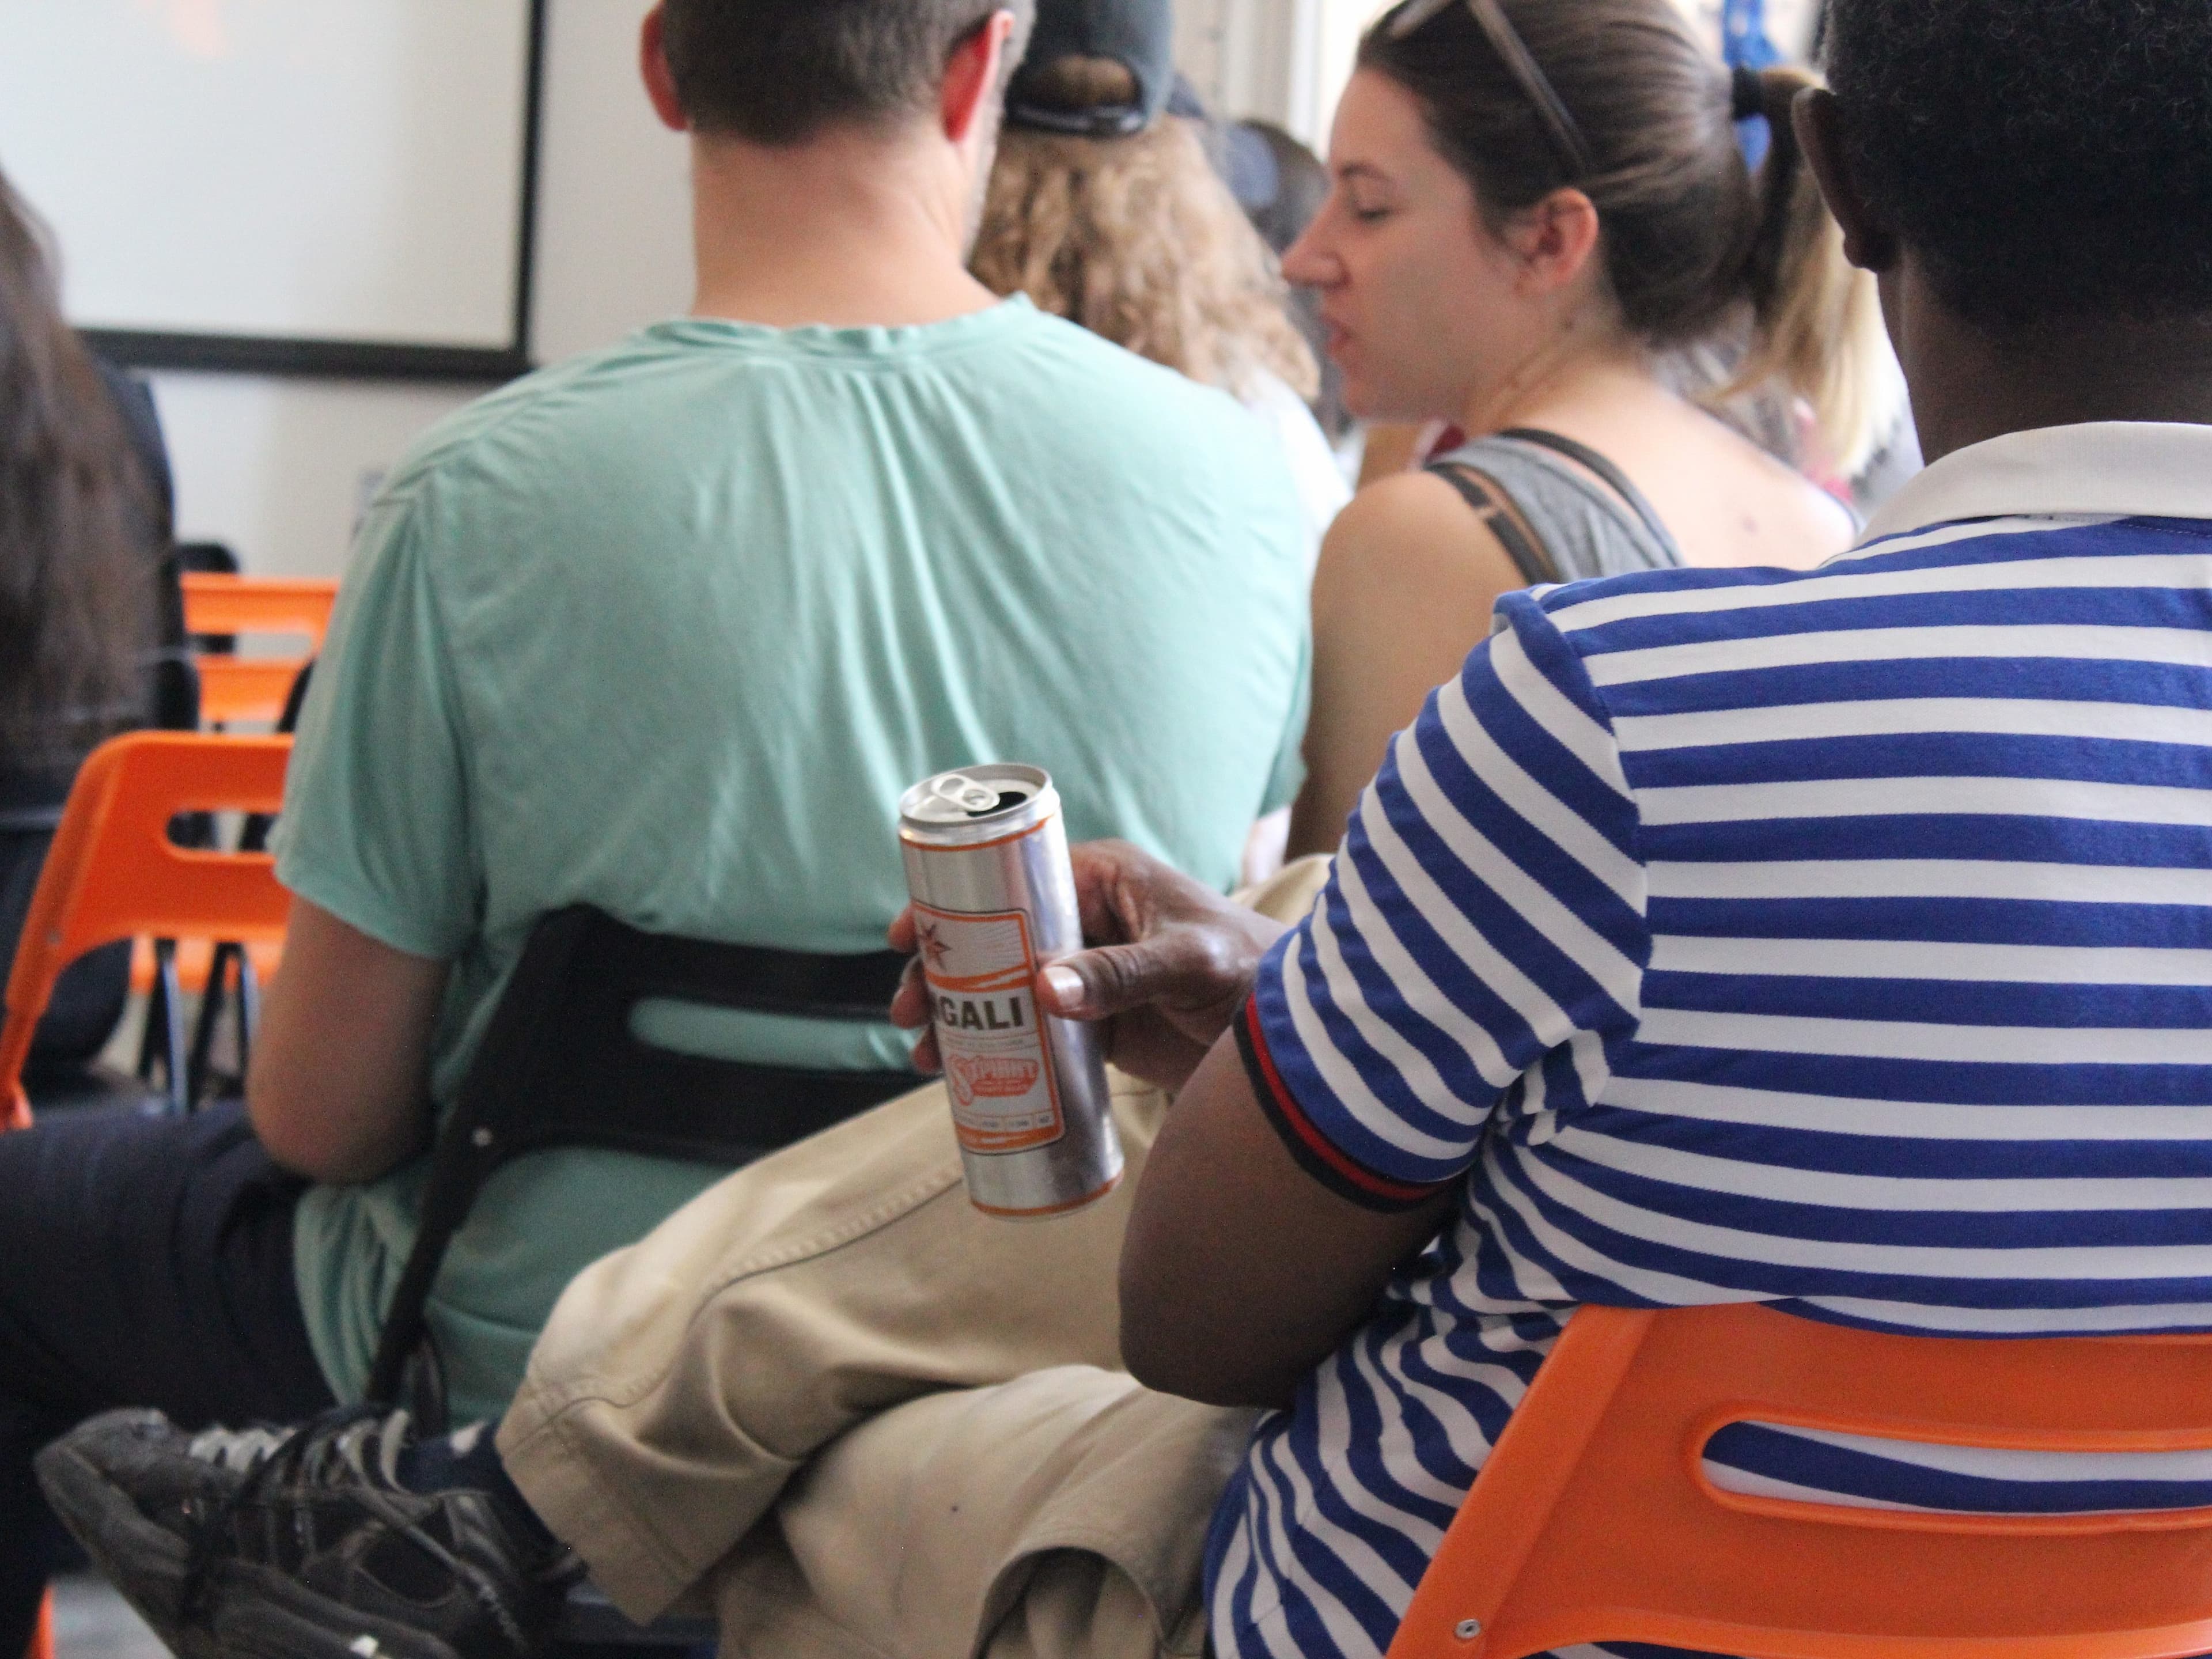 A group of people sitting on orange chairs in a classroom or seminar setting. A person in the foreground wearing a blue and white striped shirt holds an open can of beer. The focus is mainly on the people sitting, with a projector screen visible in the background.